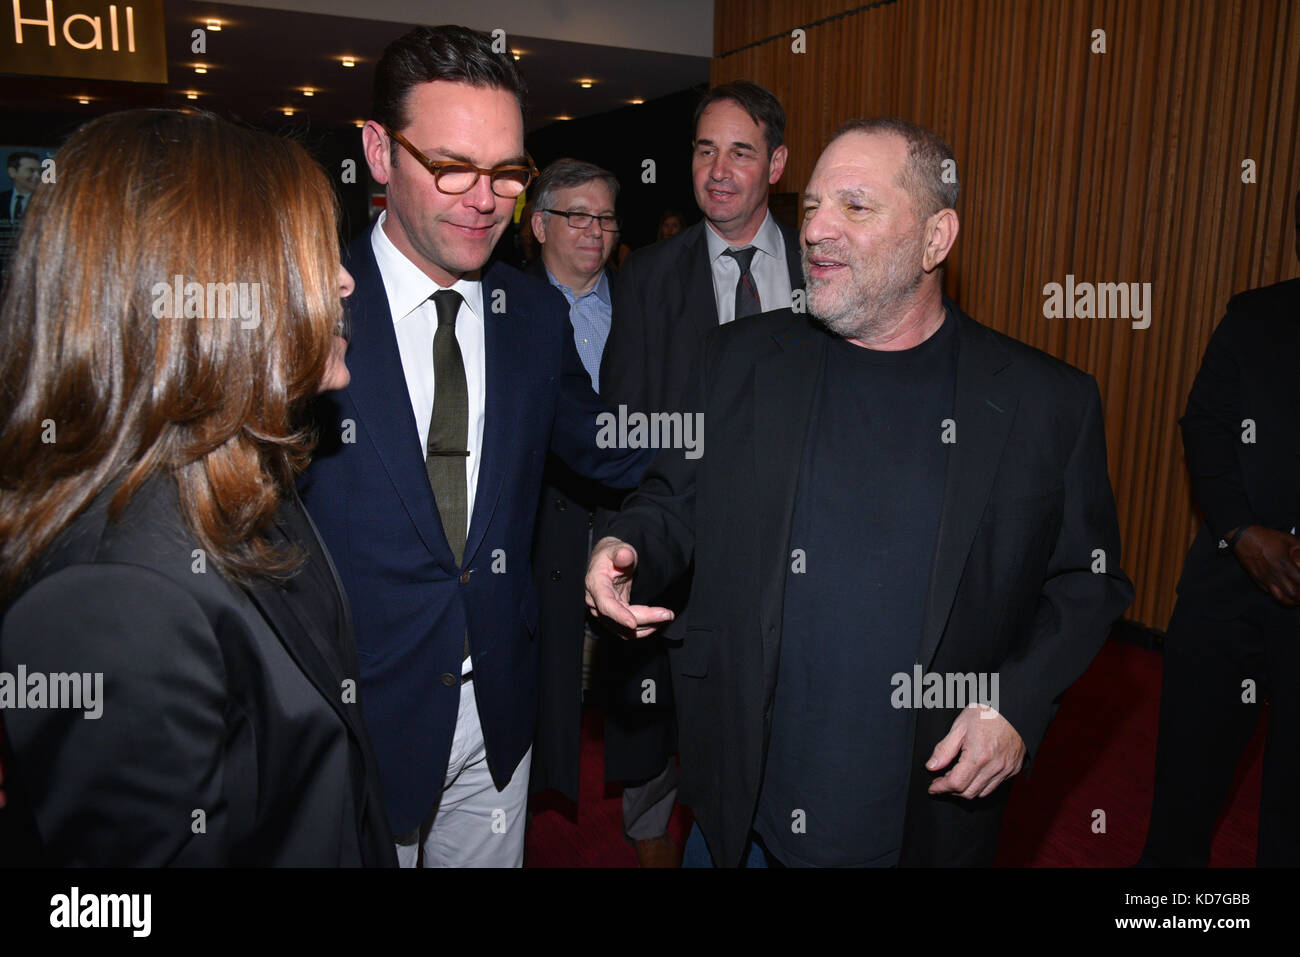 James Murdoch and Harvey Weinstein Harvey Weinstein attend. the 2017 National Geographic FURTHER FRONT at Jazz at Lincoln Center's Frederick P. Rose Hall on April 19, 2017 in New York City Stock Photo